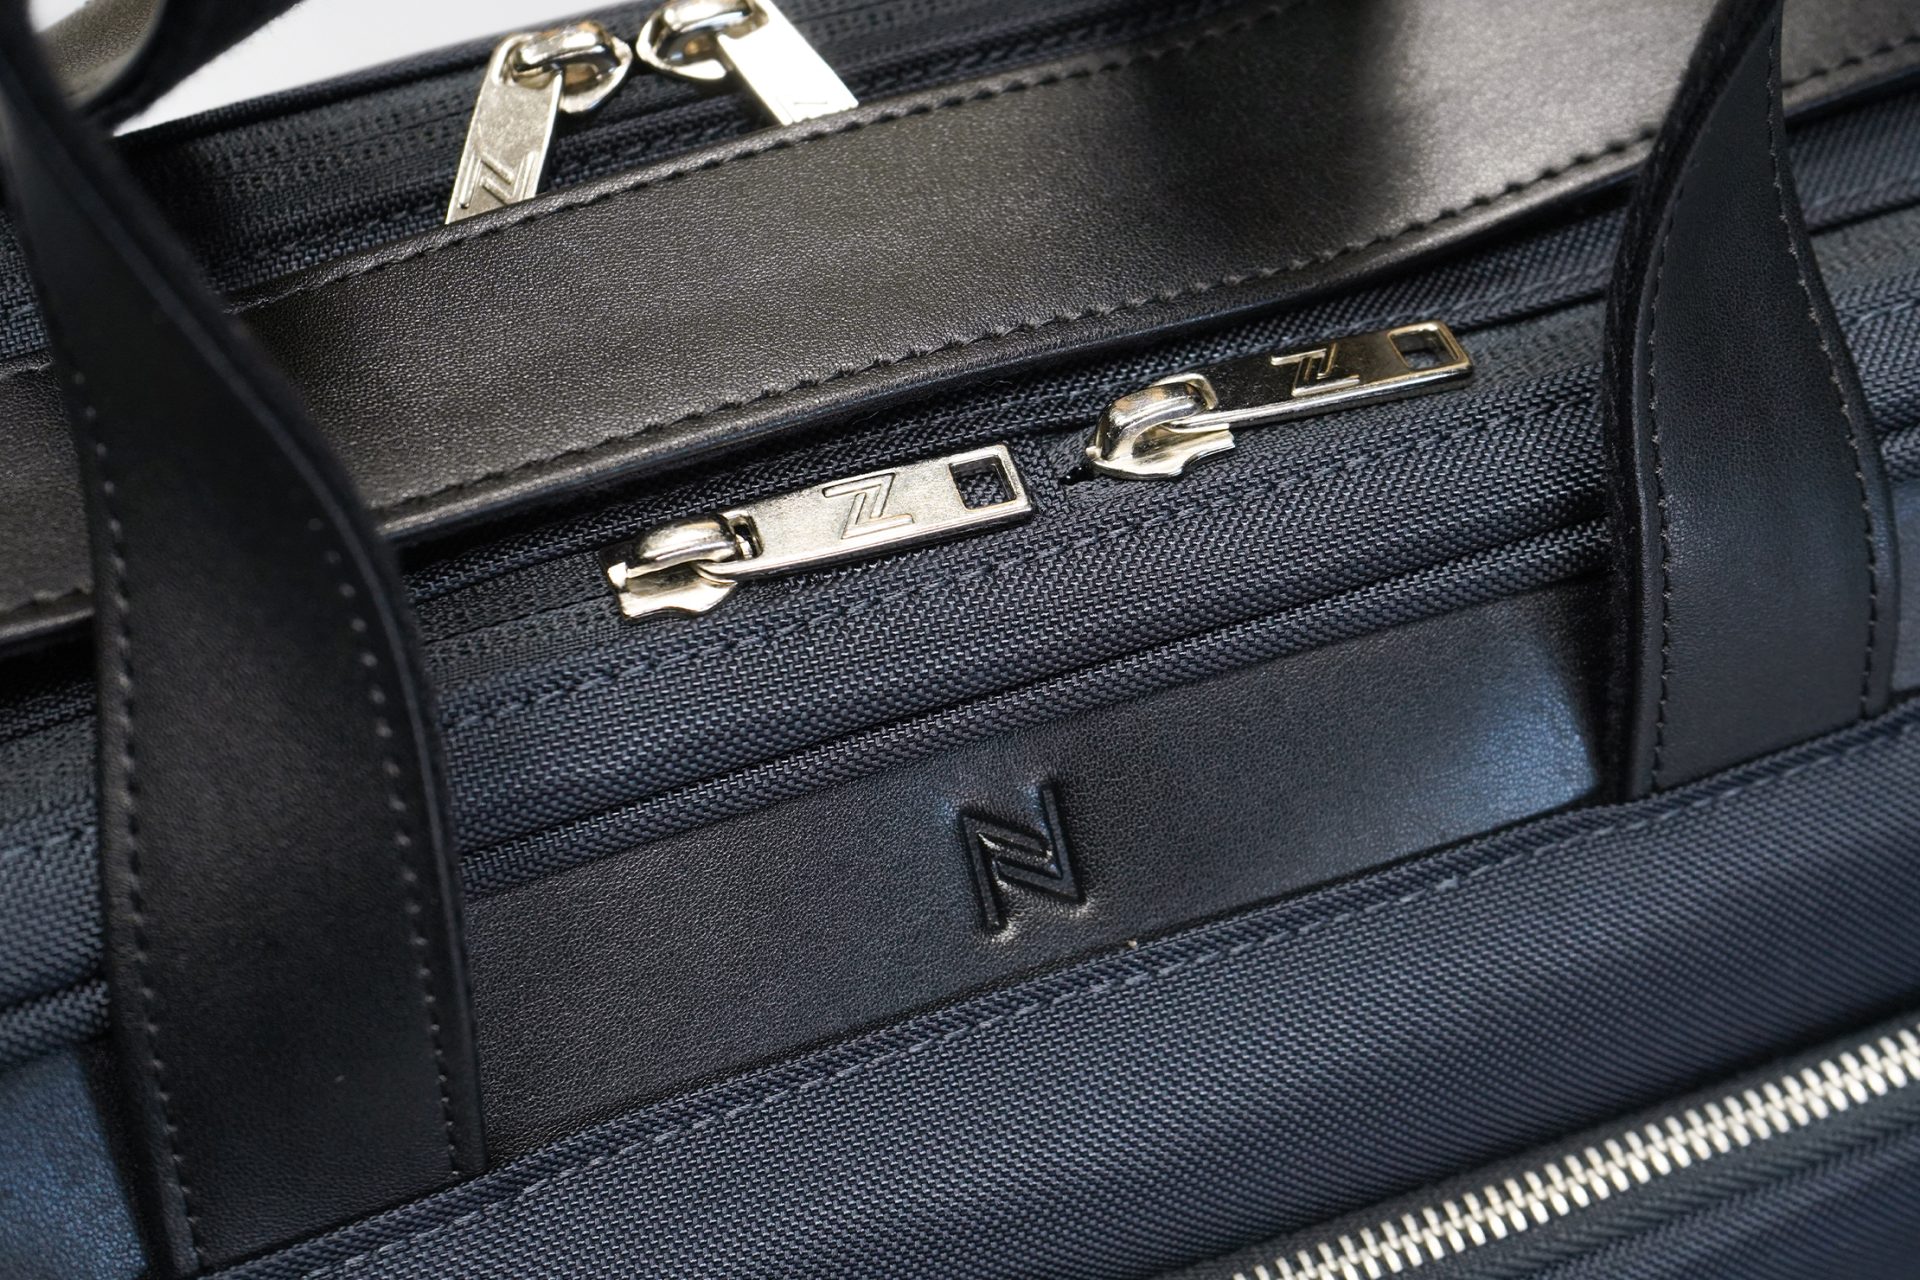 Nomad Lane Bento Bag Sport Edition materials and zippers